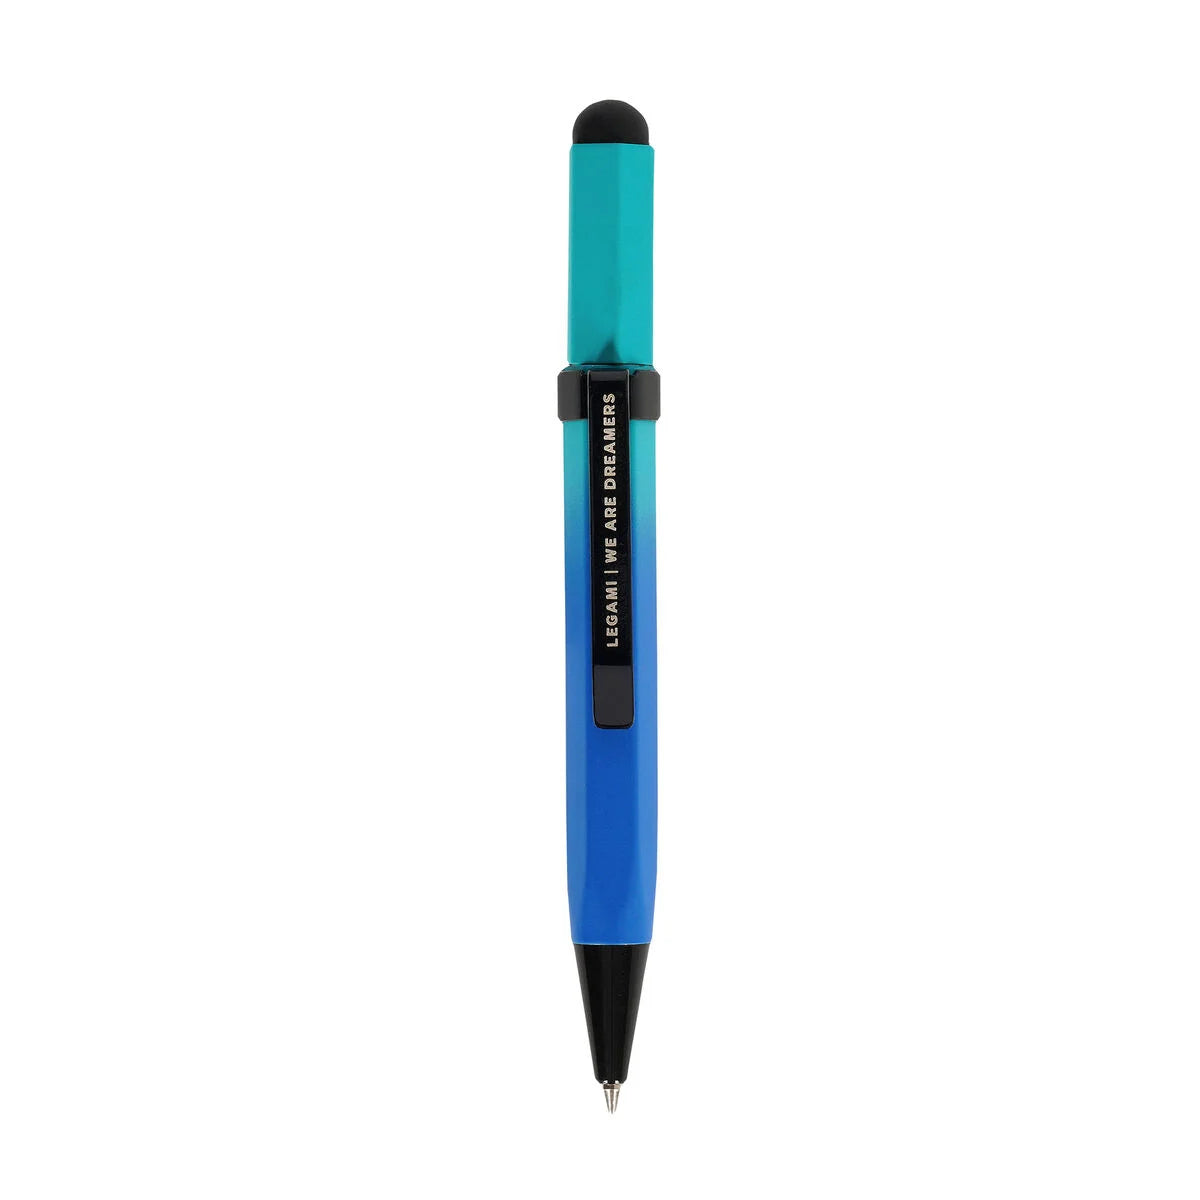 Fabulous Gifts Stationery Legami Mini Touchscreen Pen Blue Gradient by Weirs of Baggot Street